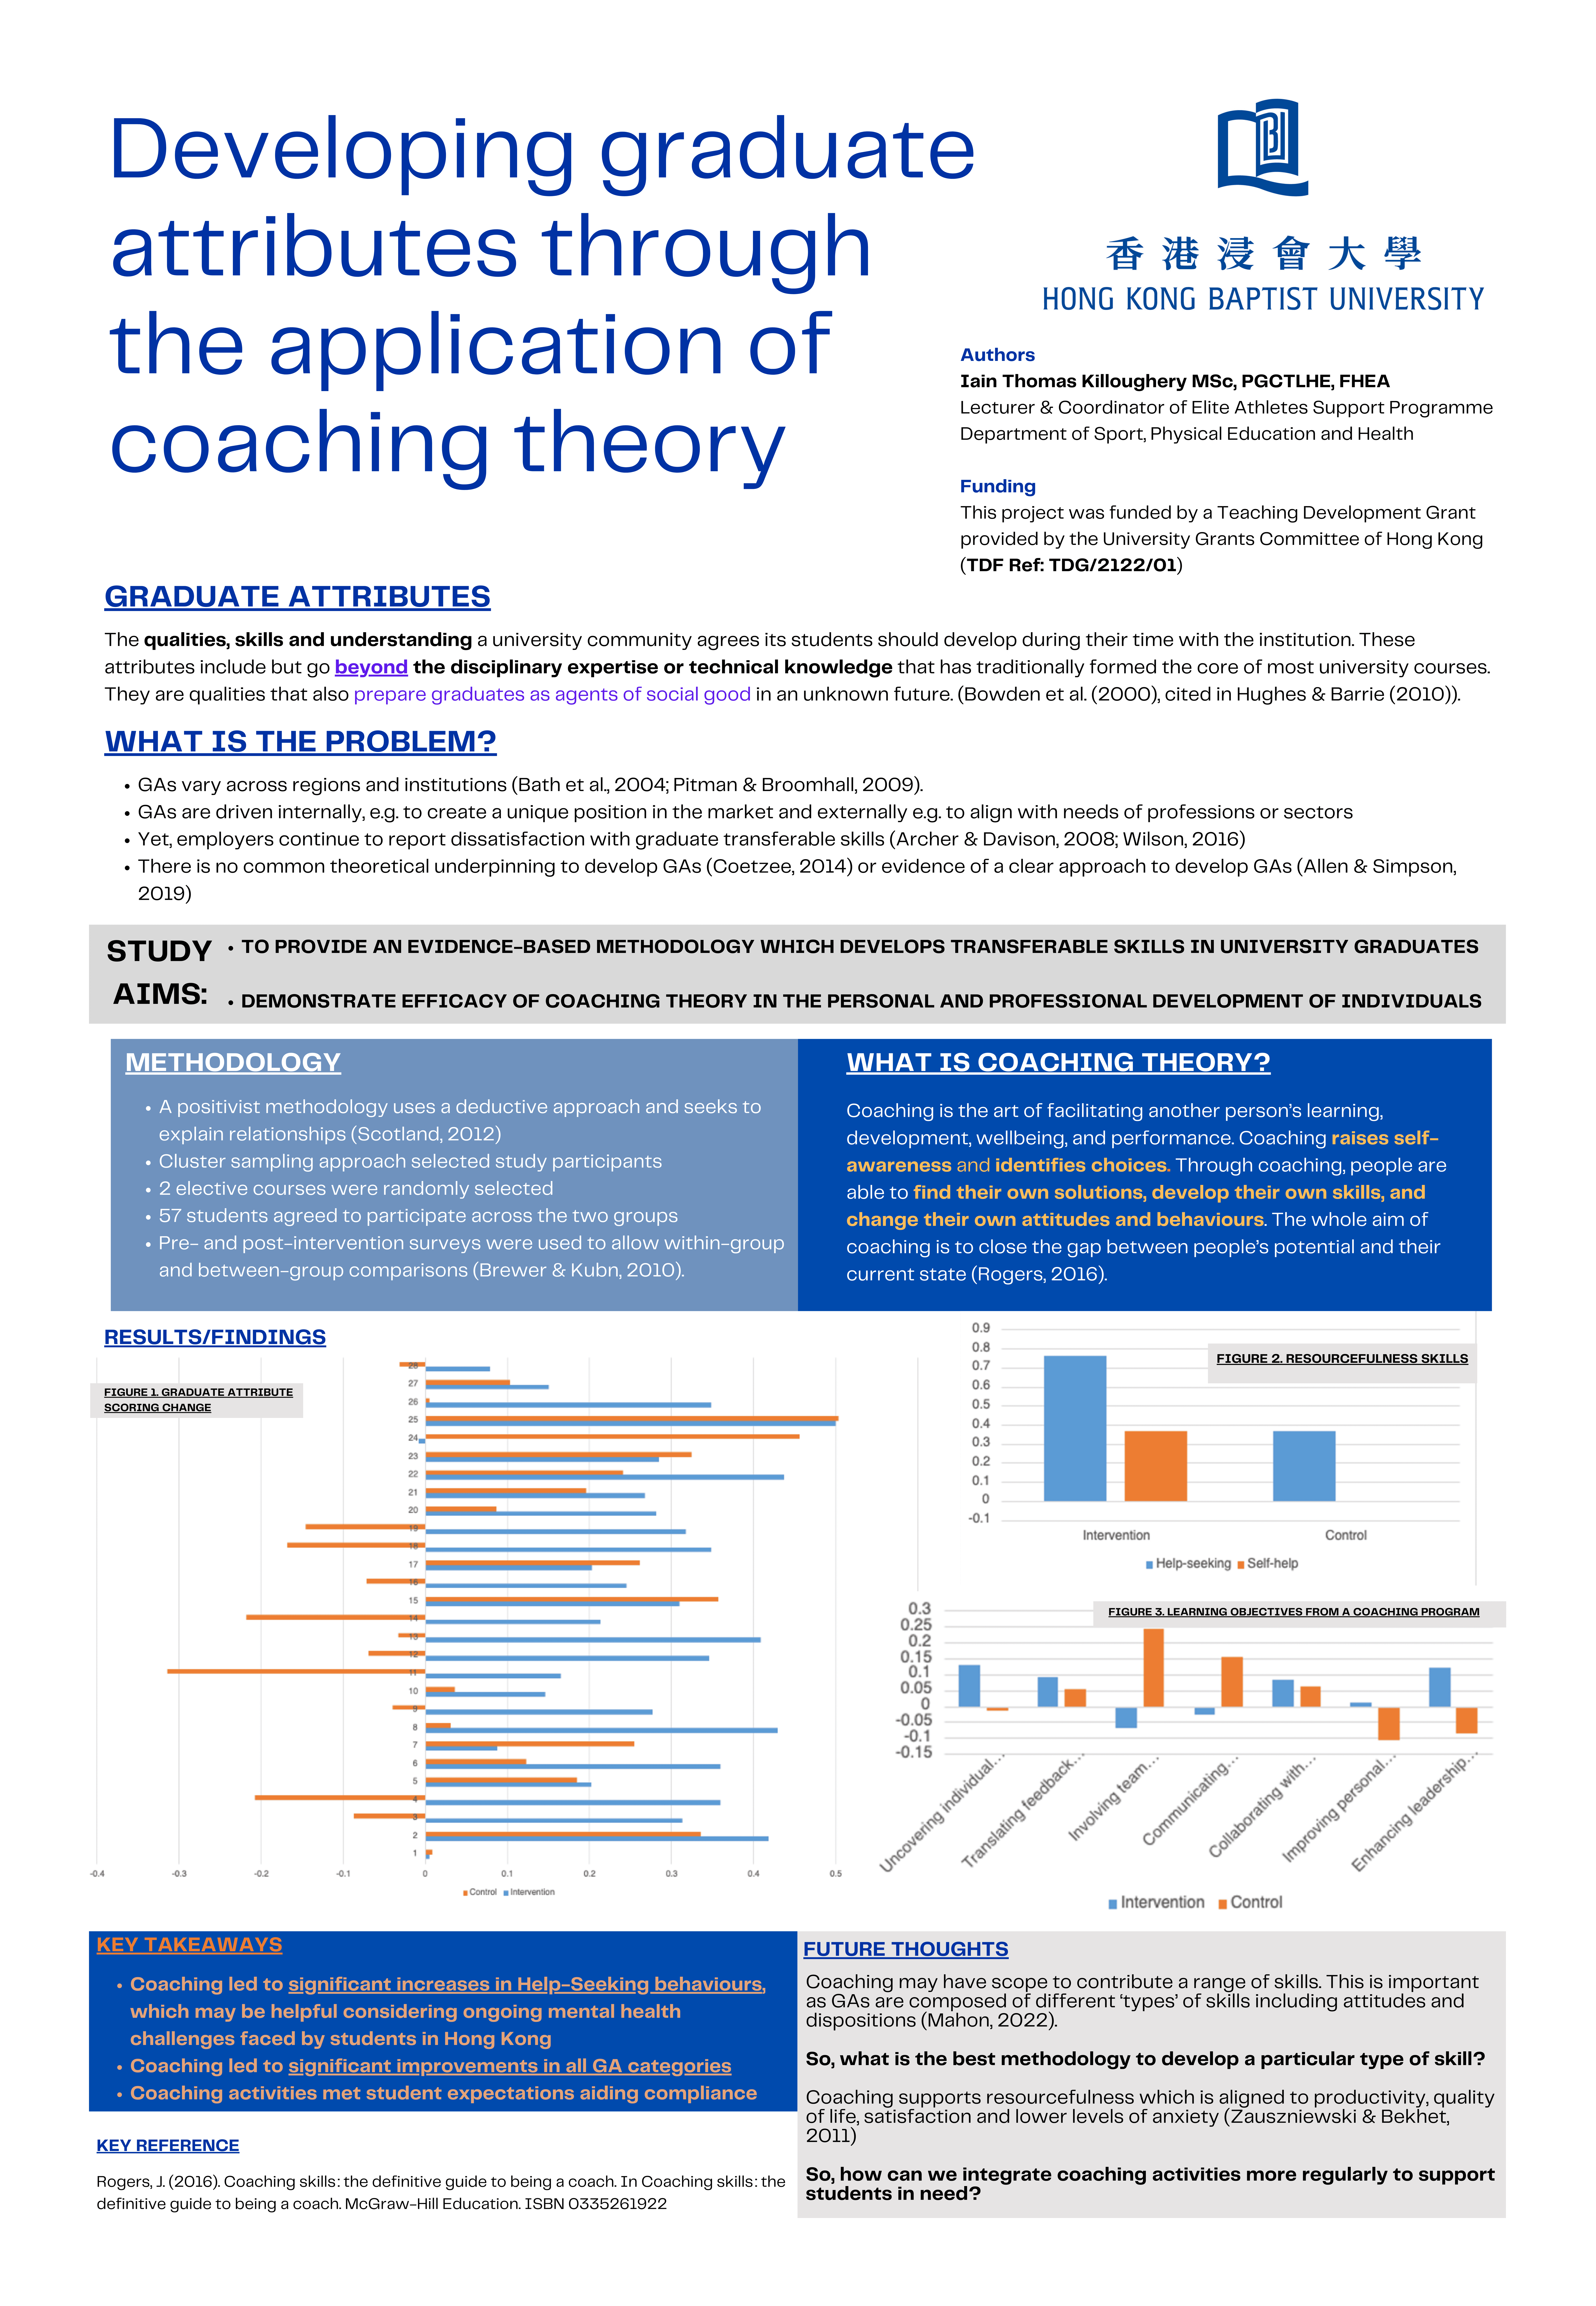  Developing Graduate Attributes through the Application of Coaching Theory